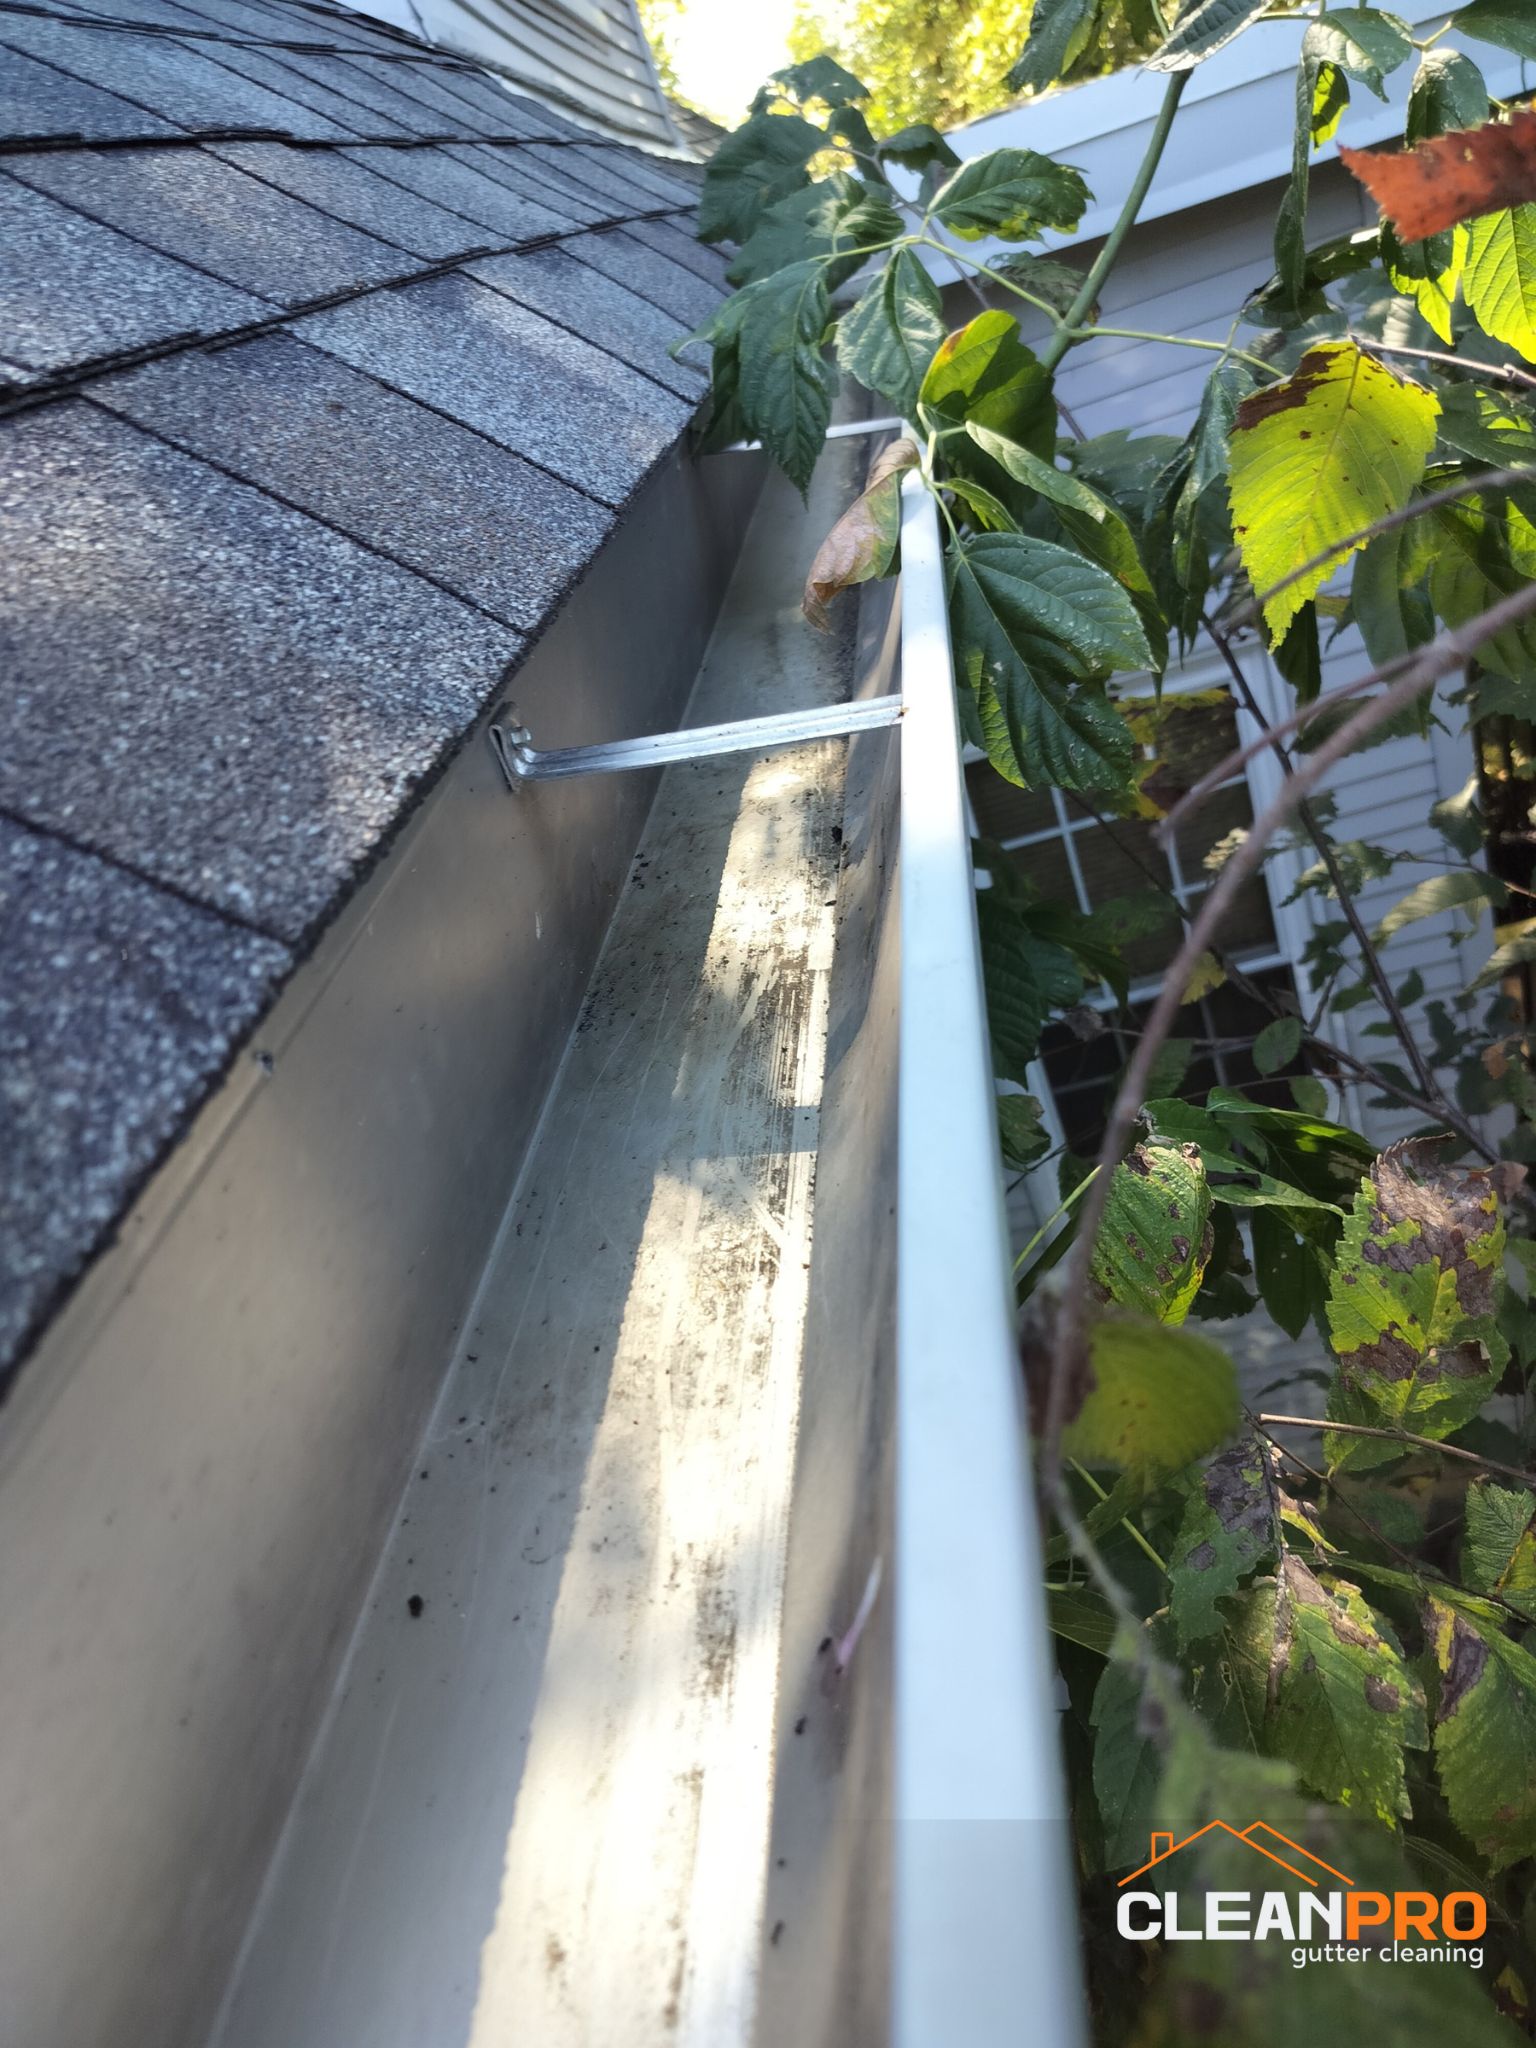 Best Gutter Cleaning Service in Raleigh